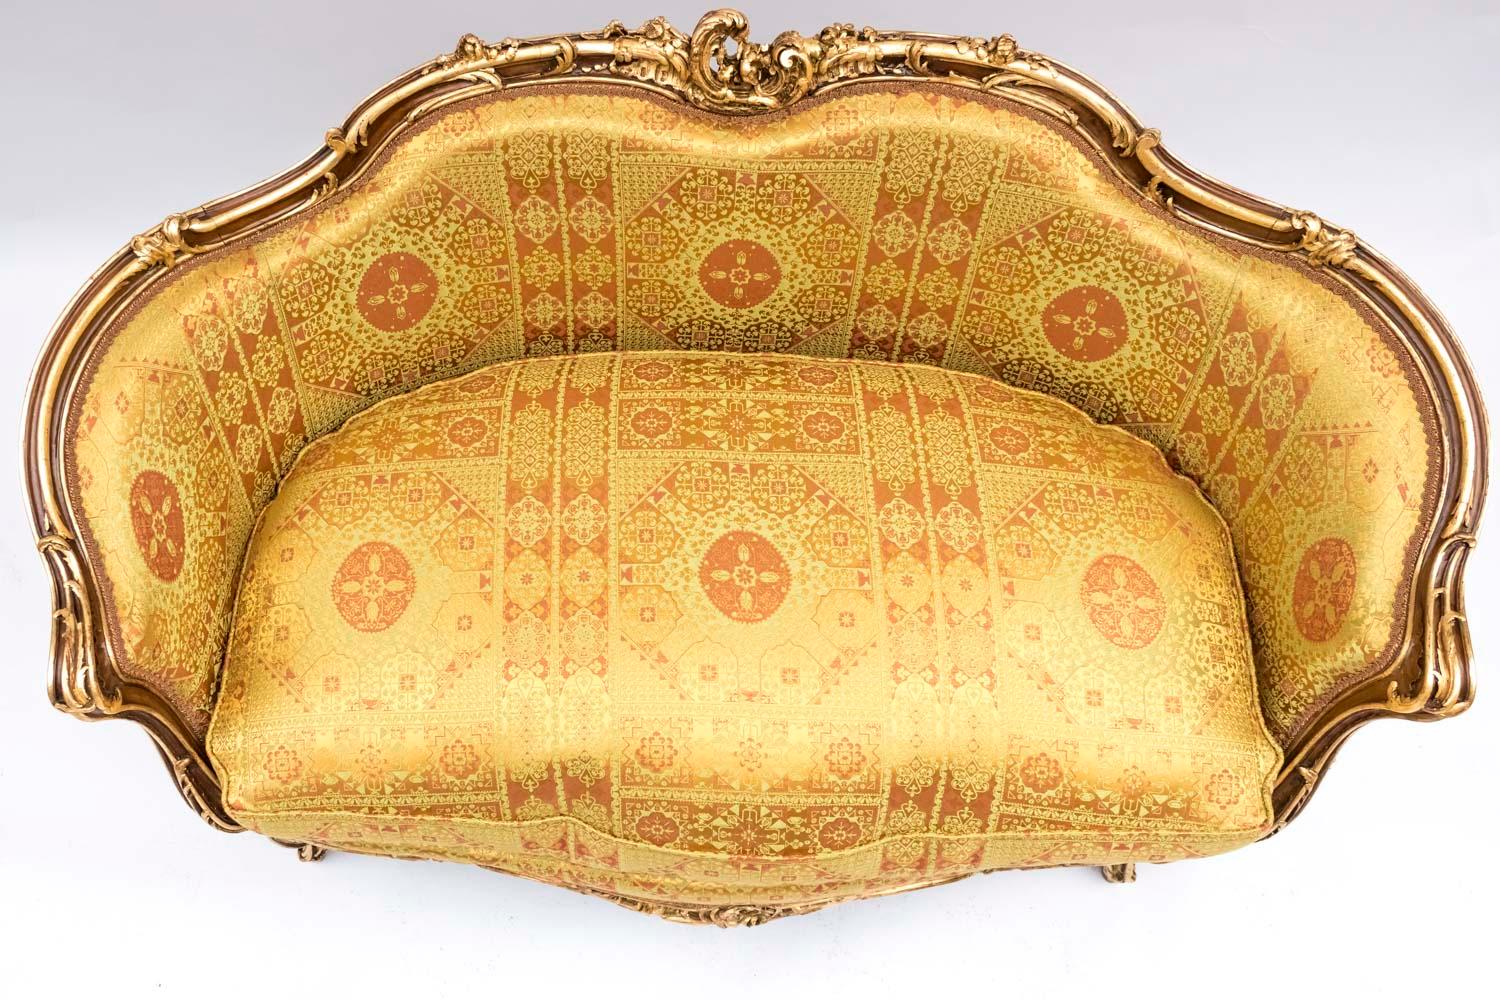 French Small Rocaille Style Sofa, Natural Walnut and Gilt Highlights, Late 19th Century